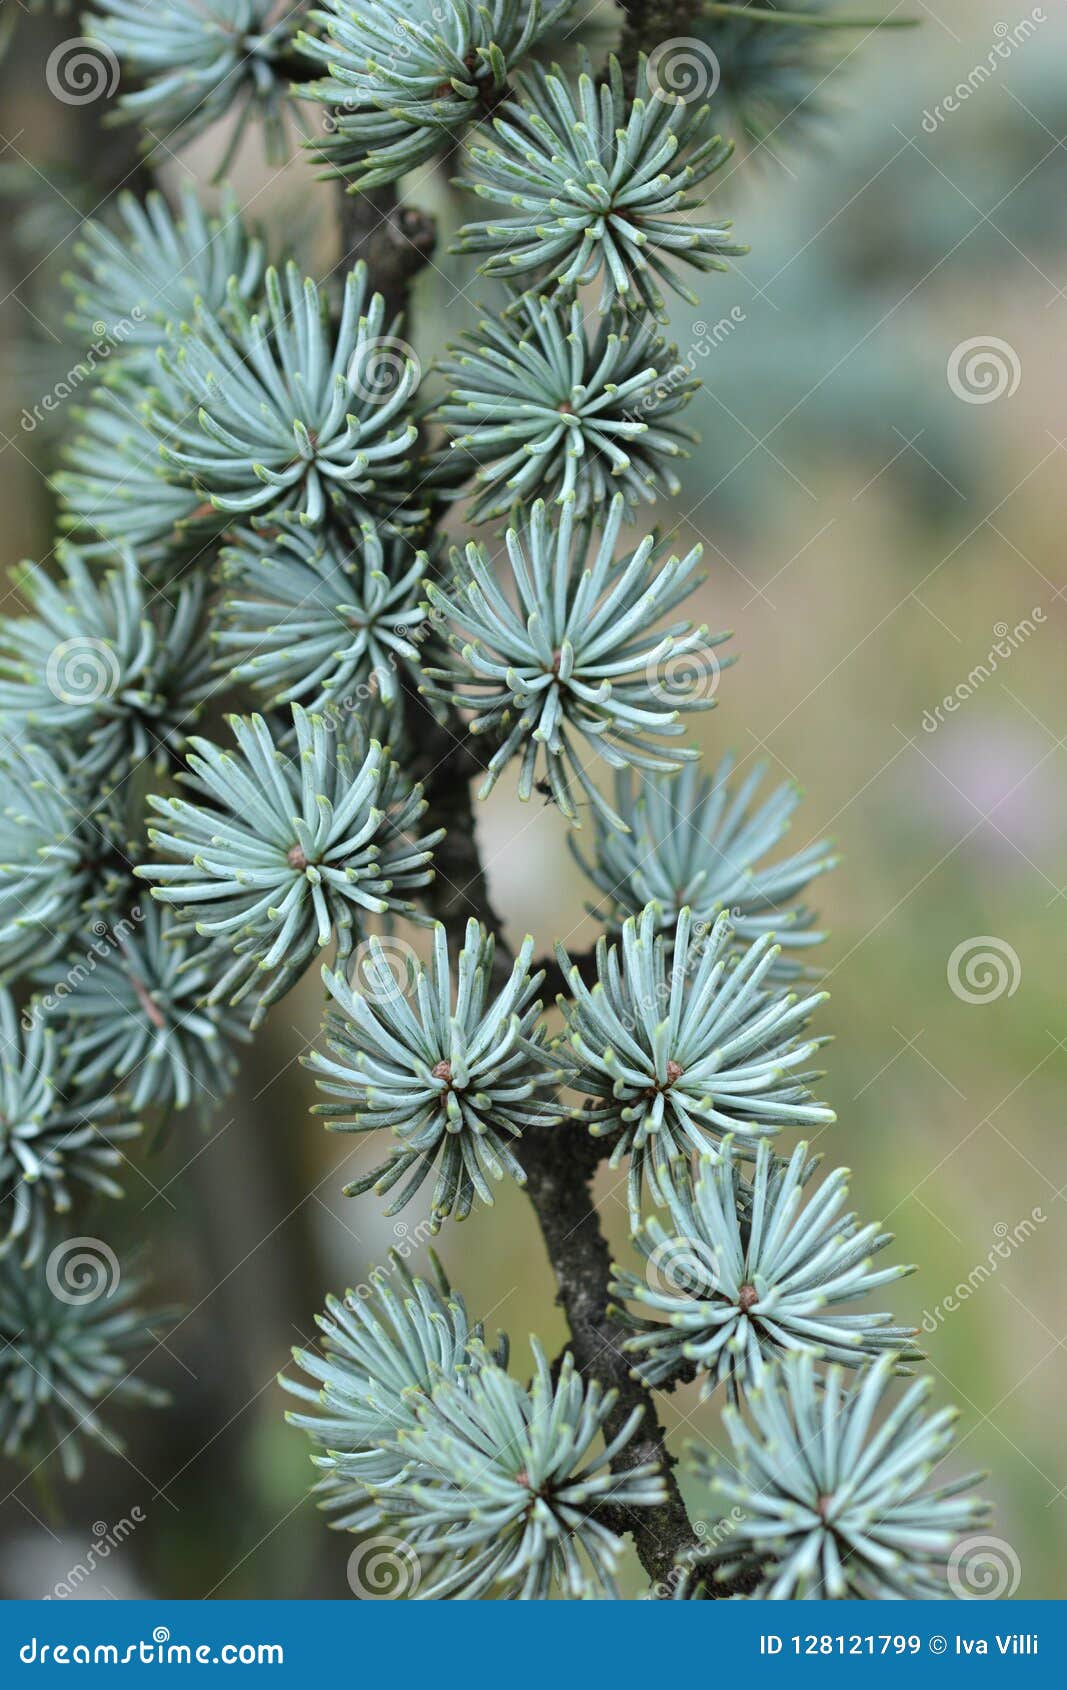 Blue Atlas Cedar Stock Image Image Of Tree Green Branch 128121799,What Temp To Cook Pork Chops On Grill